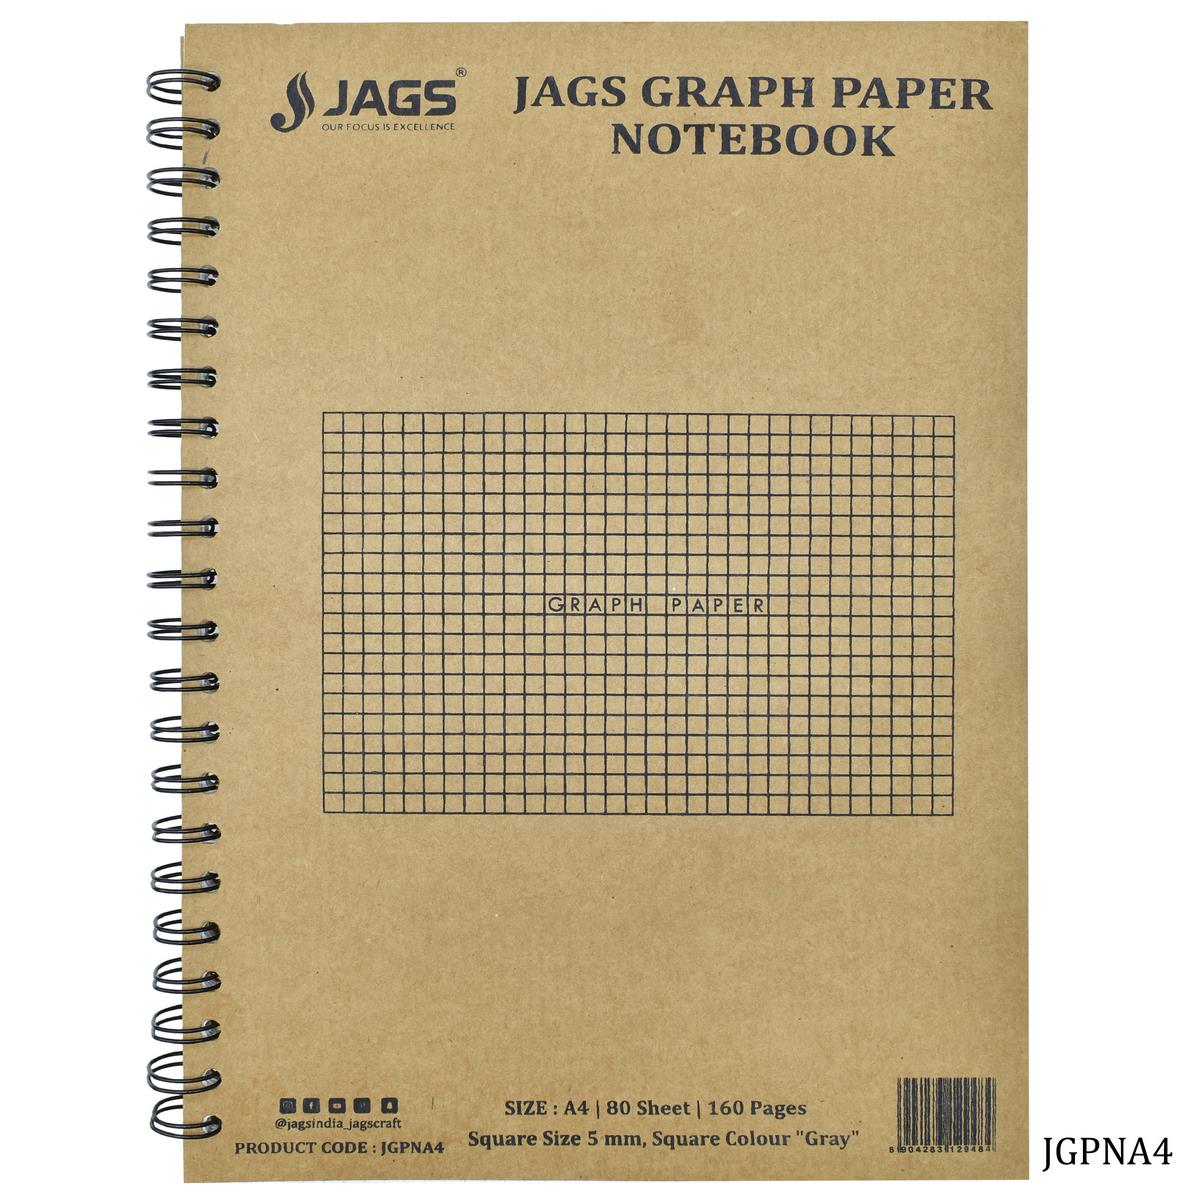 jags-mumbai Notebooks & Diaries Jags Graph Paper Notebook A4 160Pages